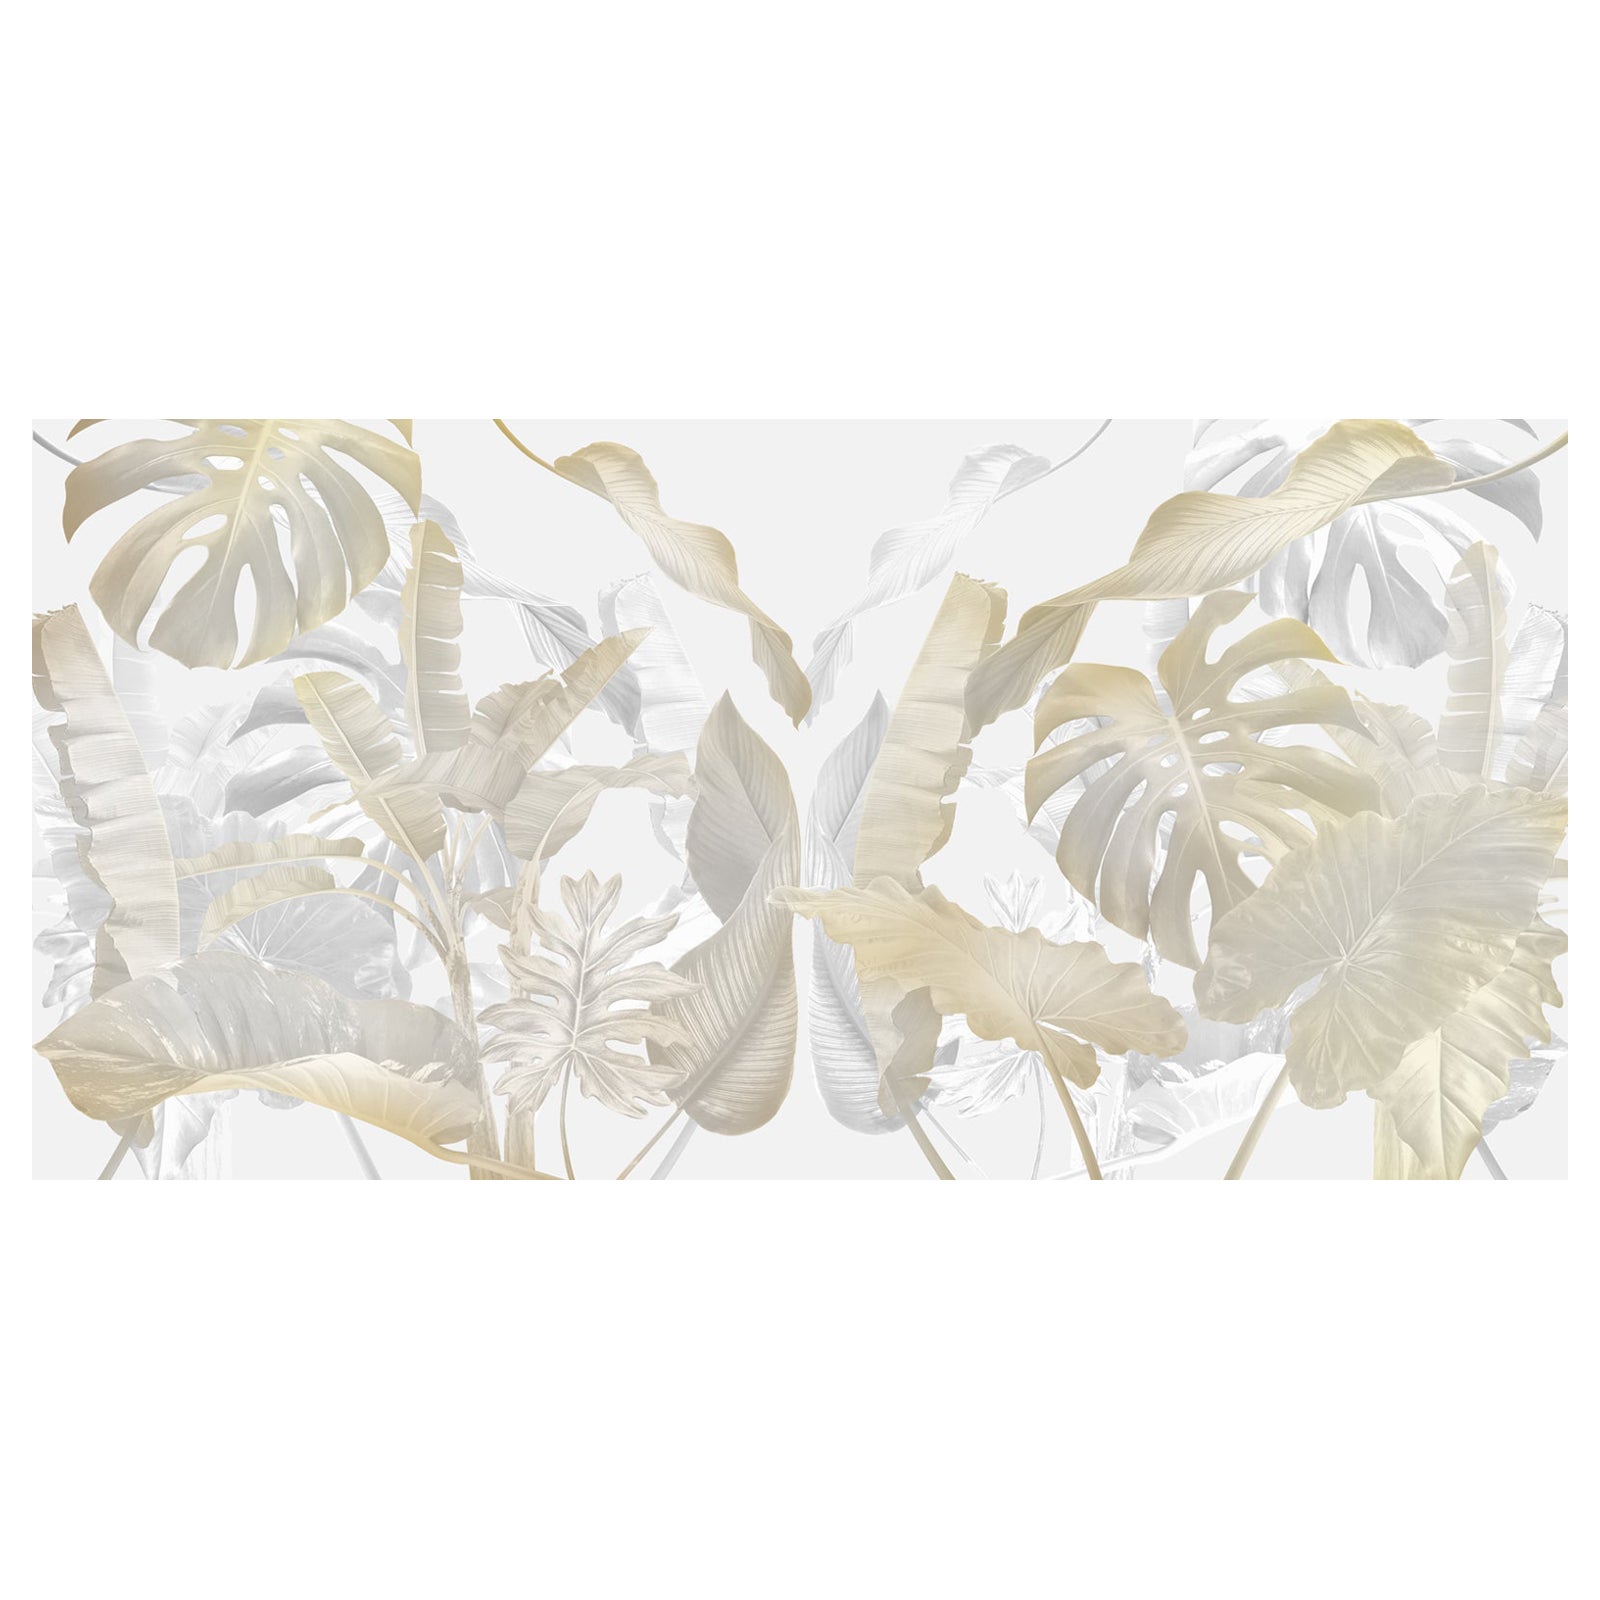 EDGE Collections JungleScape Gold; a whimsical nod to endless Summers